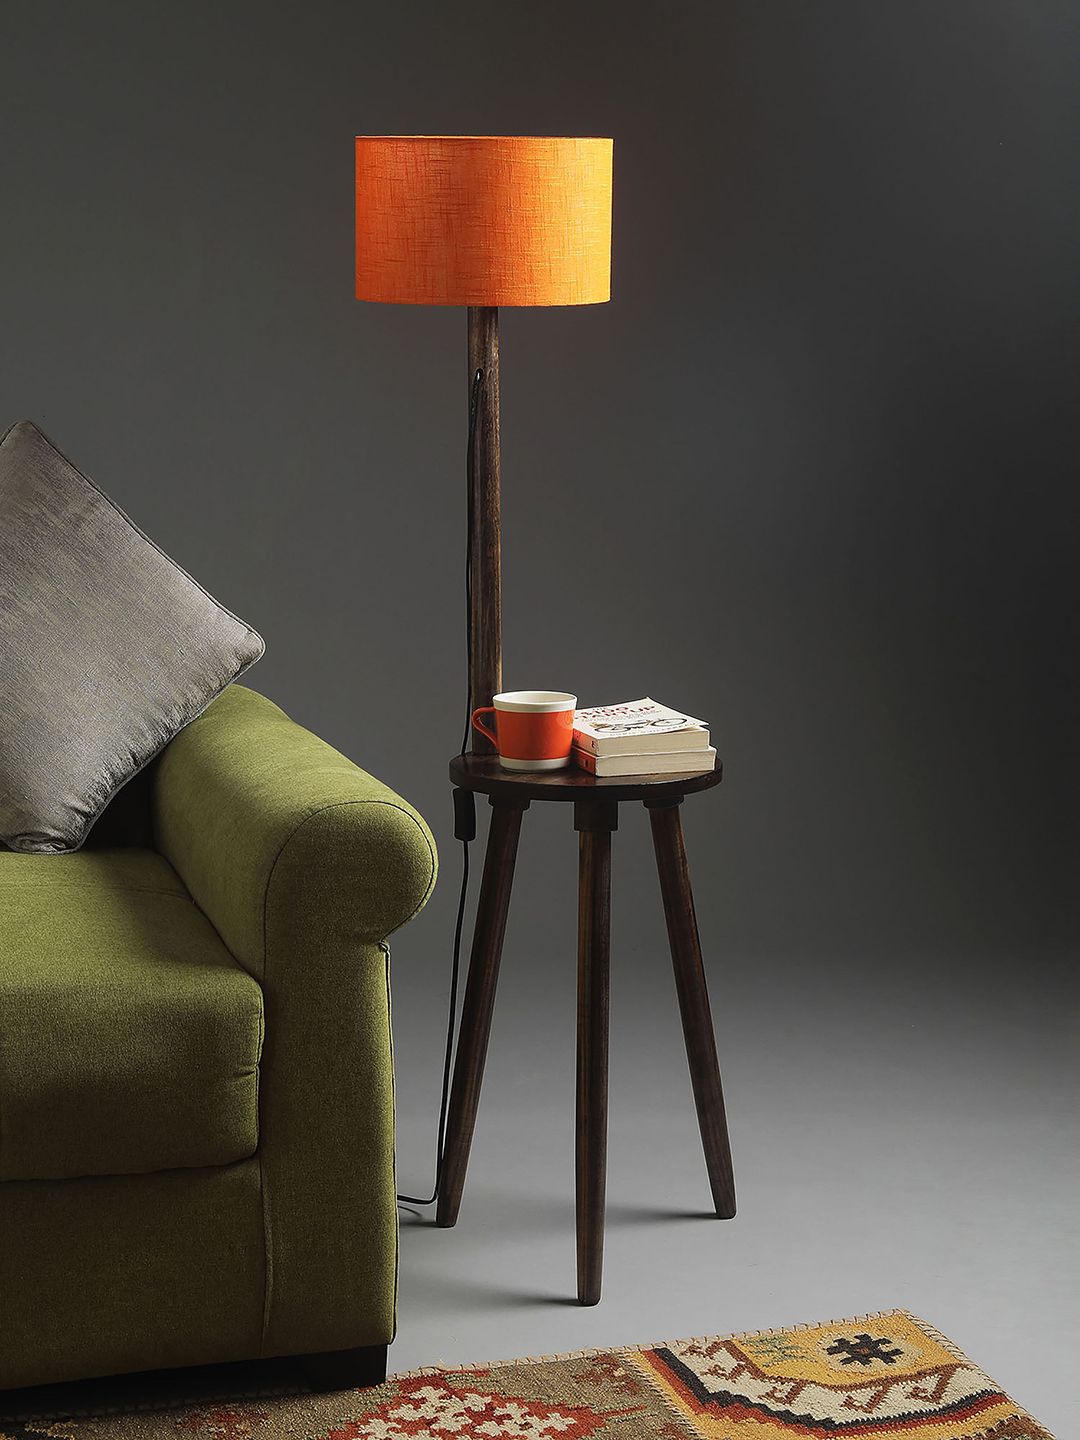 SANDED EDGE Orange & Brown Contemporary Floor Lamp with Walnut Finish Base Price in India